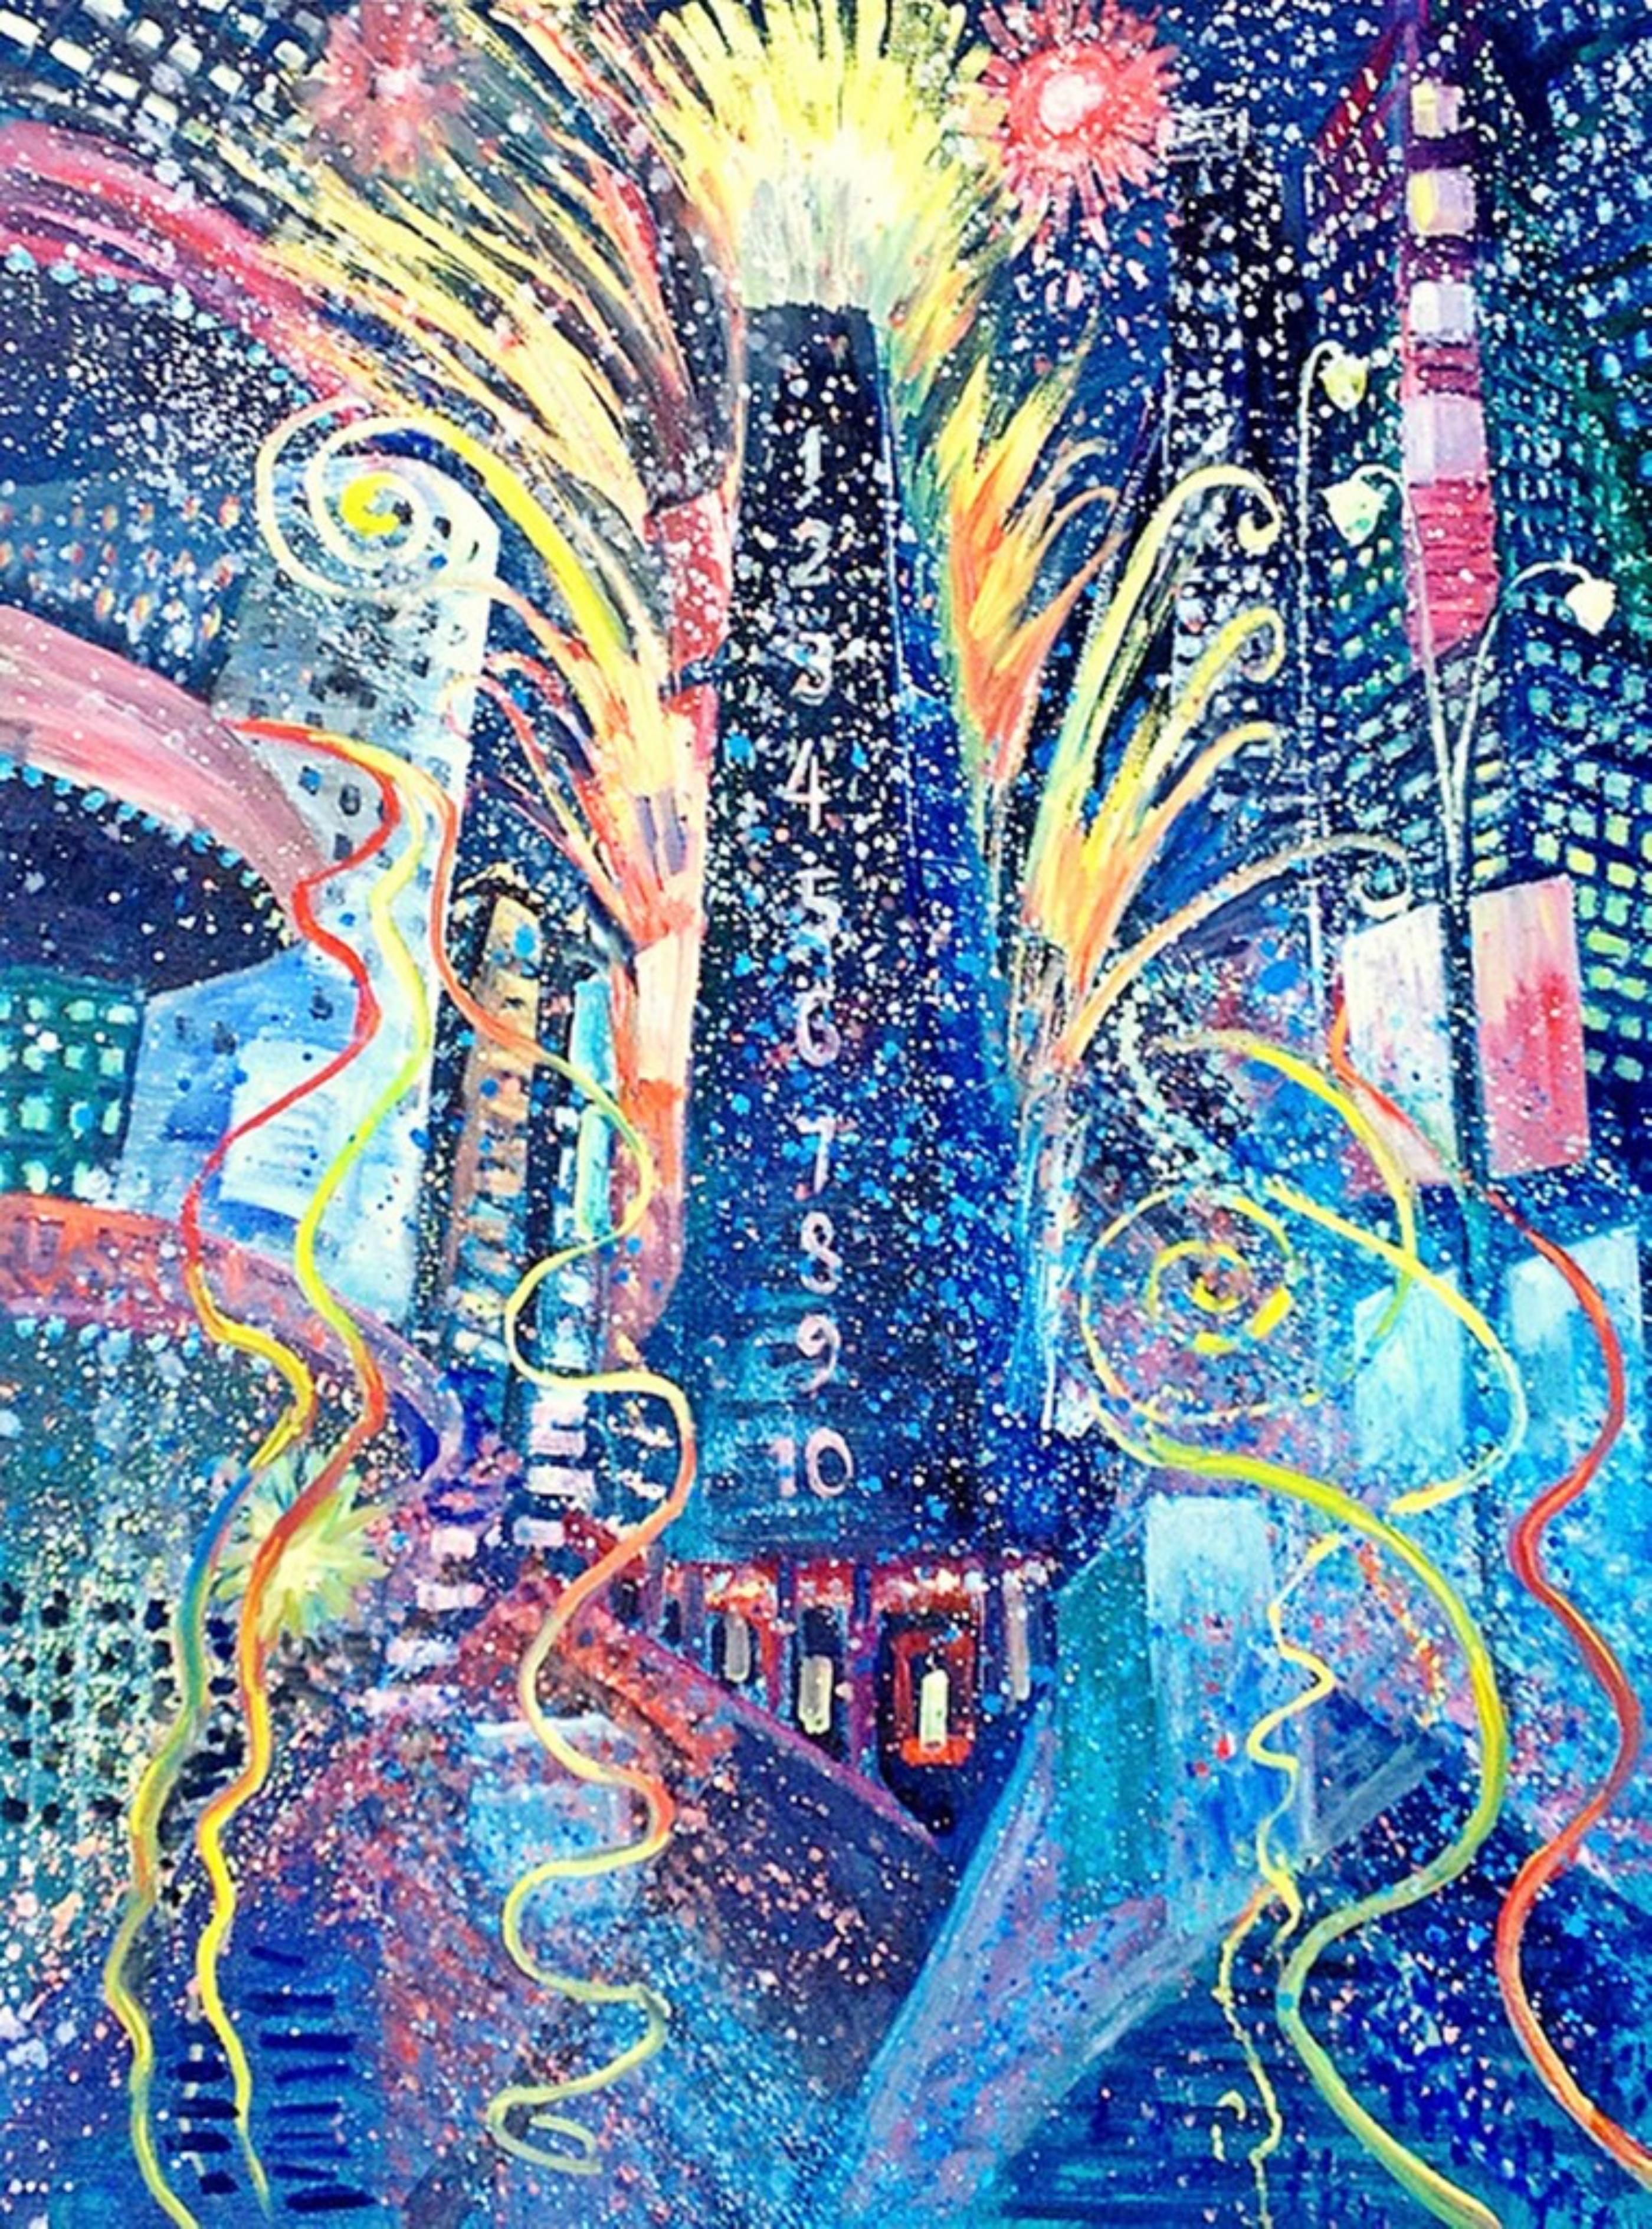 Times Square III, New Years, unique painting by renowned contemporary artist - Painting by Thelma Appel